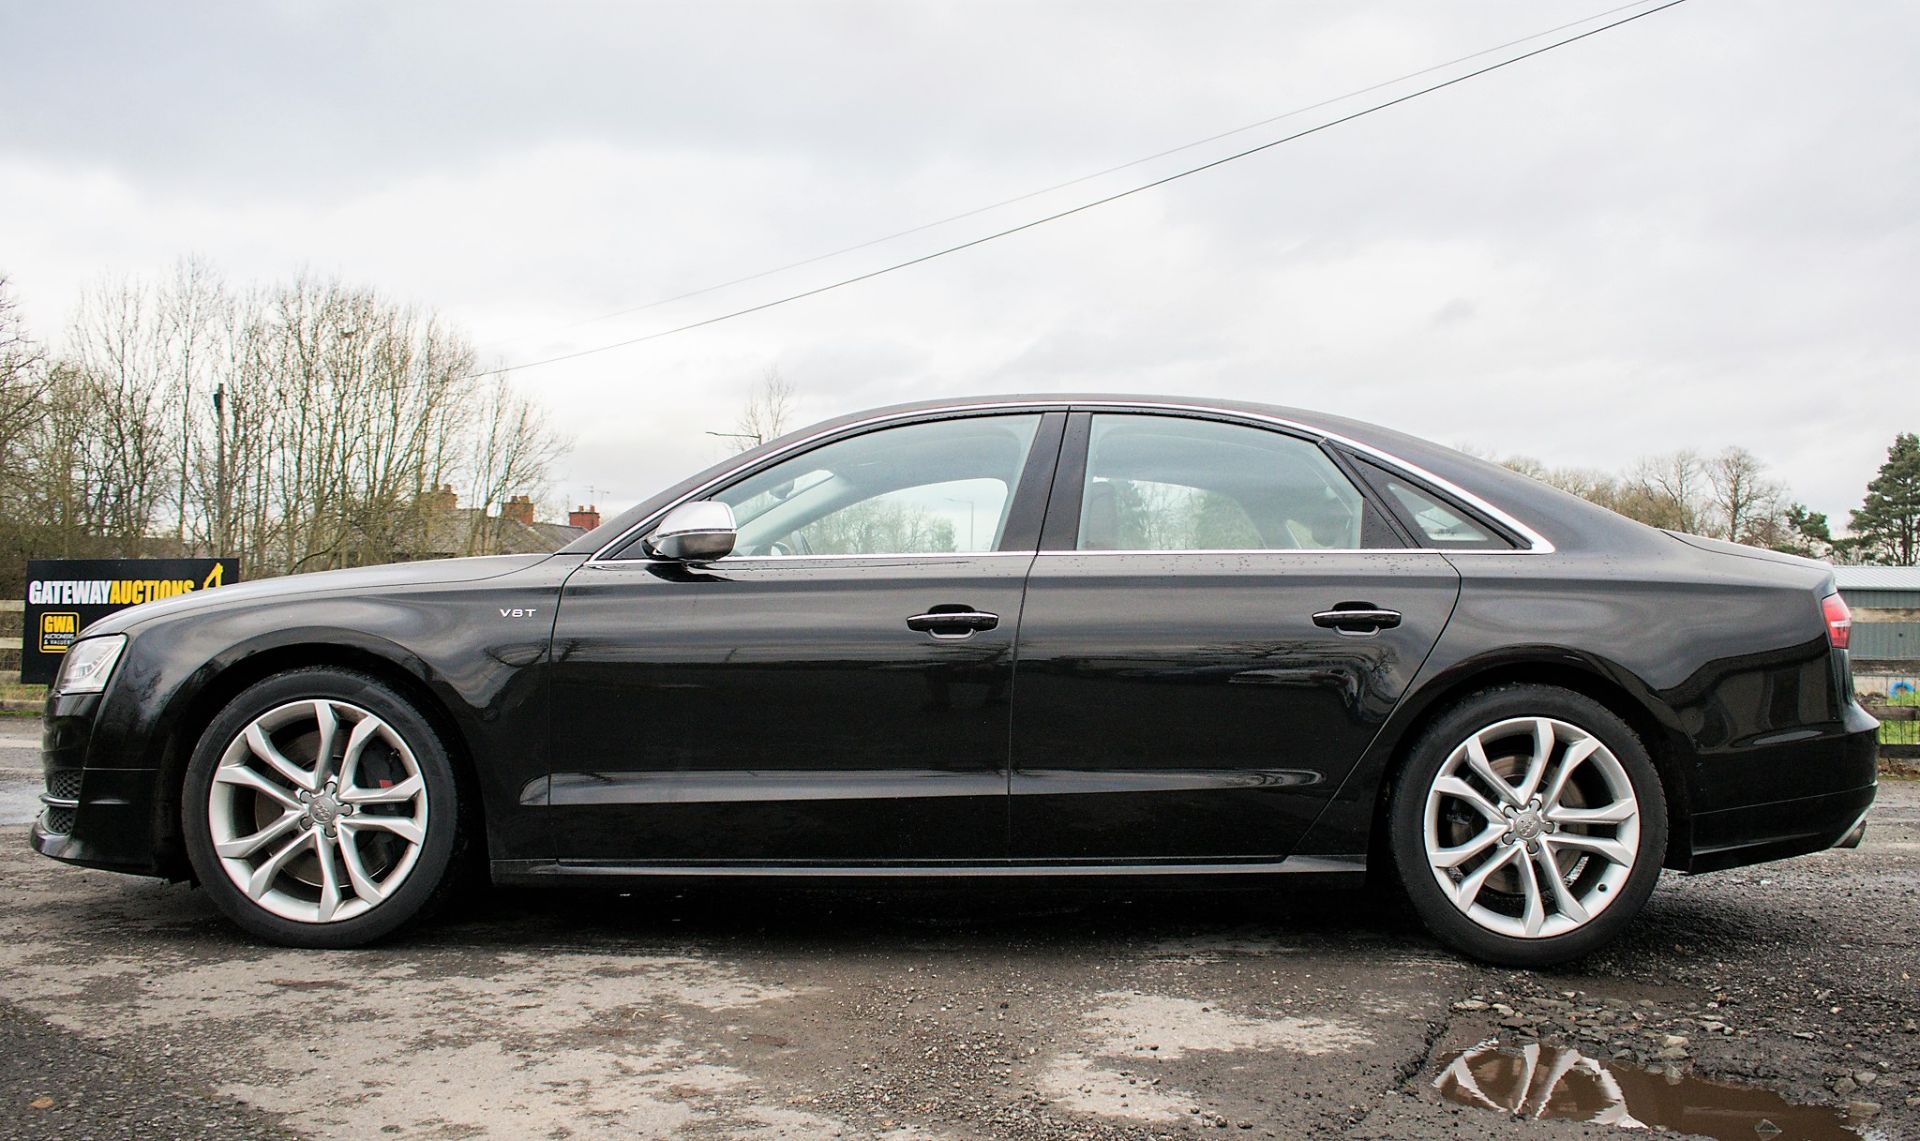 Audi S8 V8 TFSi Quattro Auto 4 door saloon car Registration Number: MW65 RXD Date of Registration: - Image 7 of 20